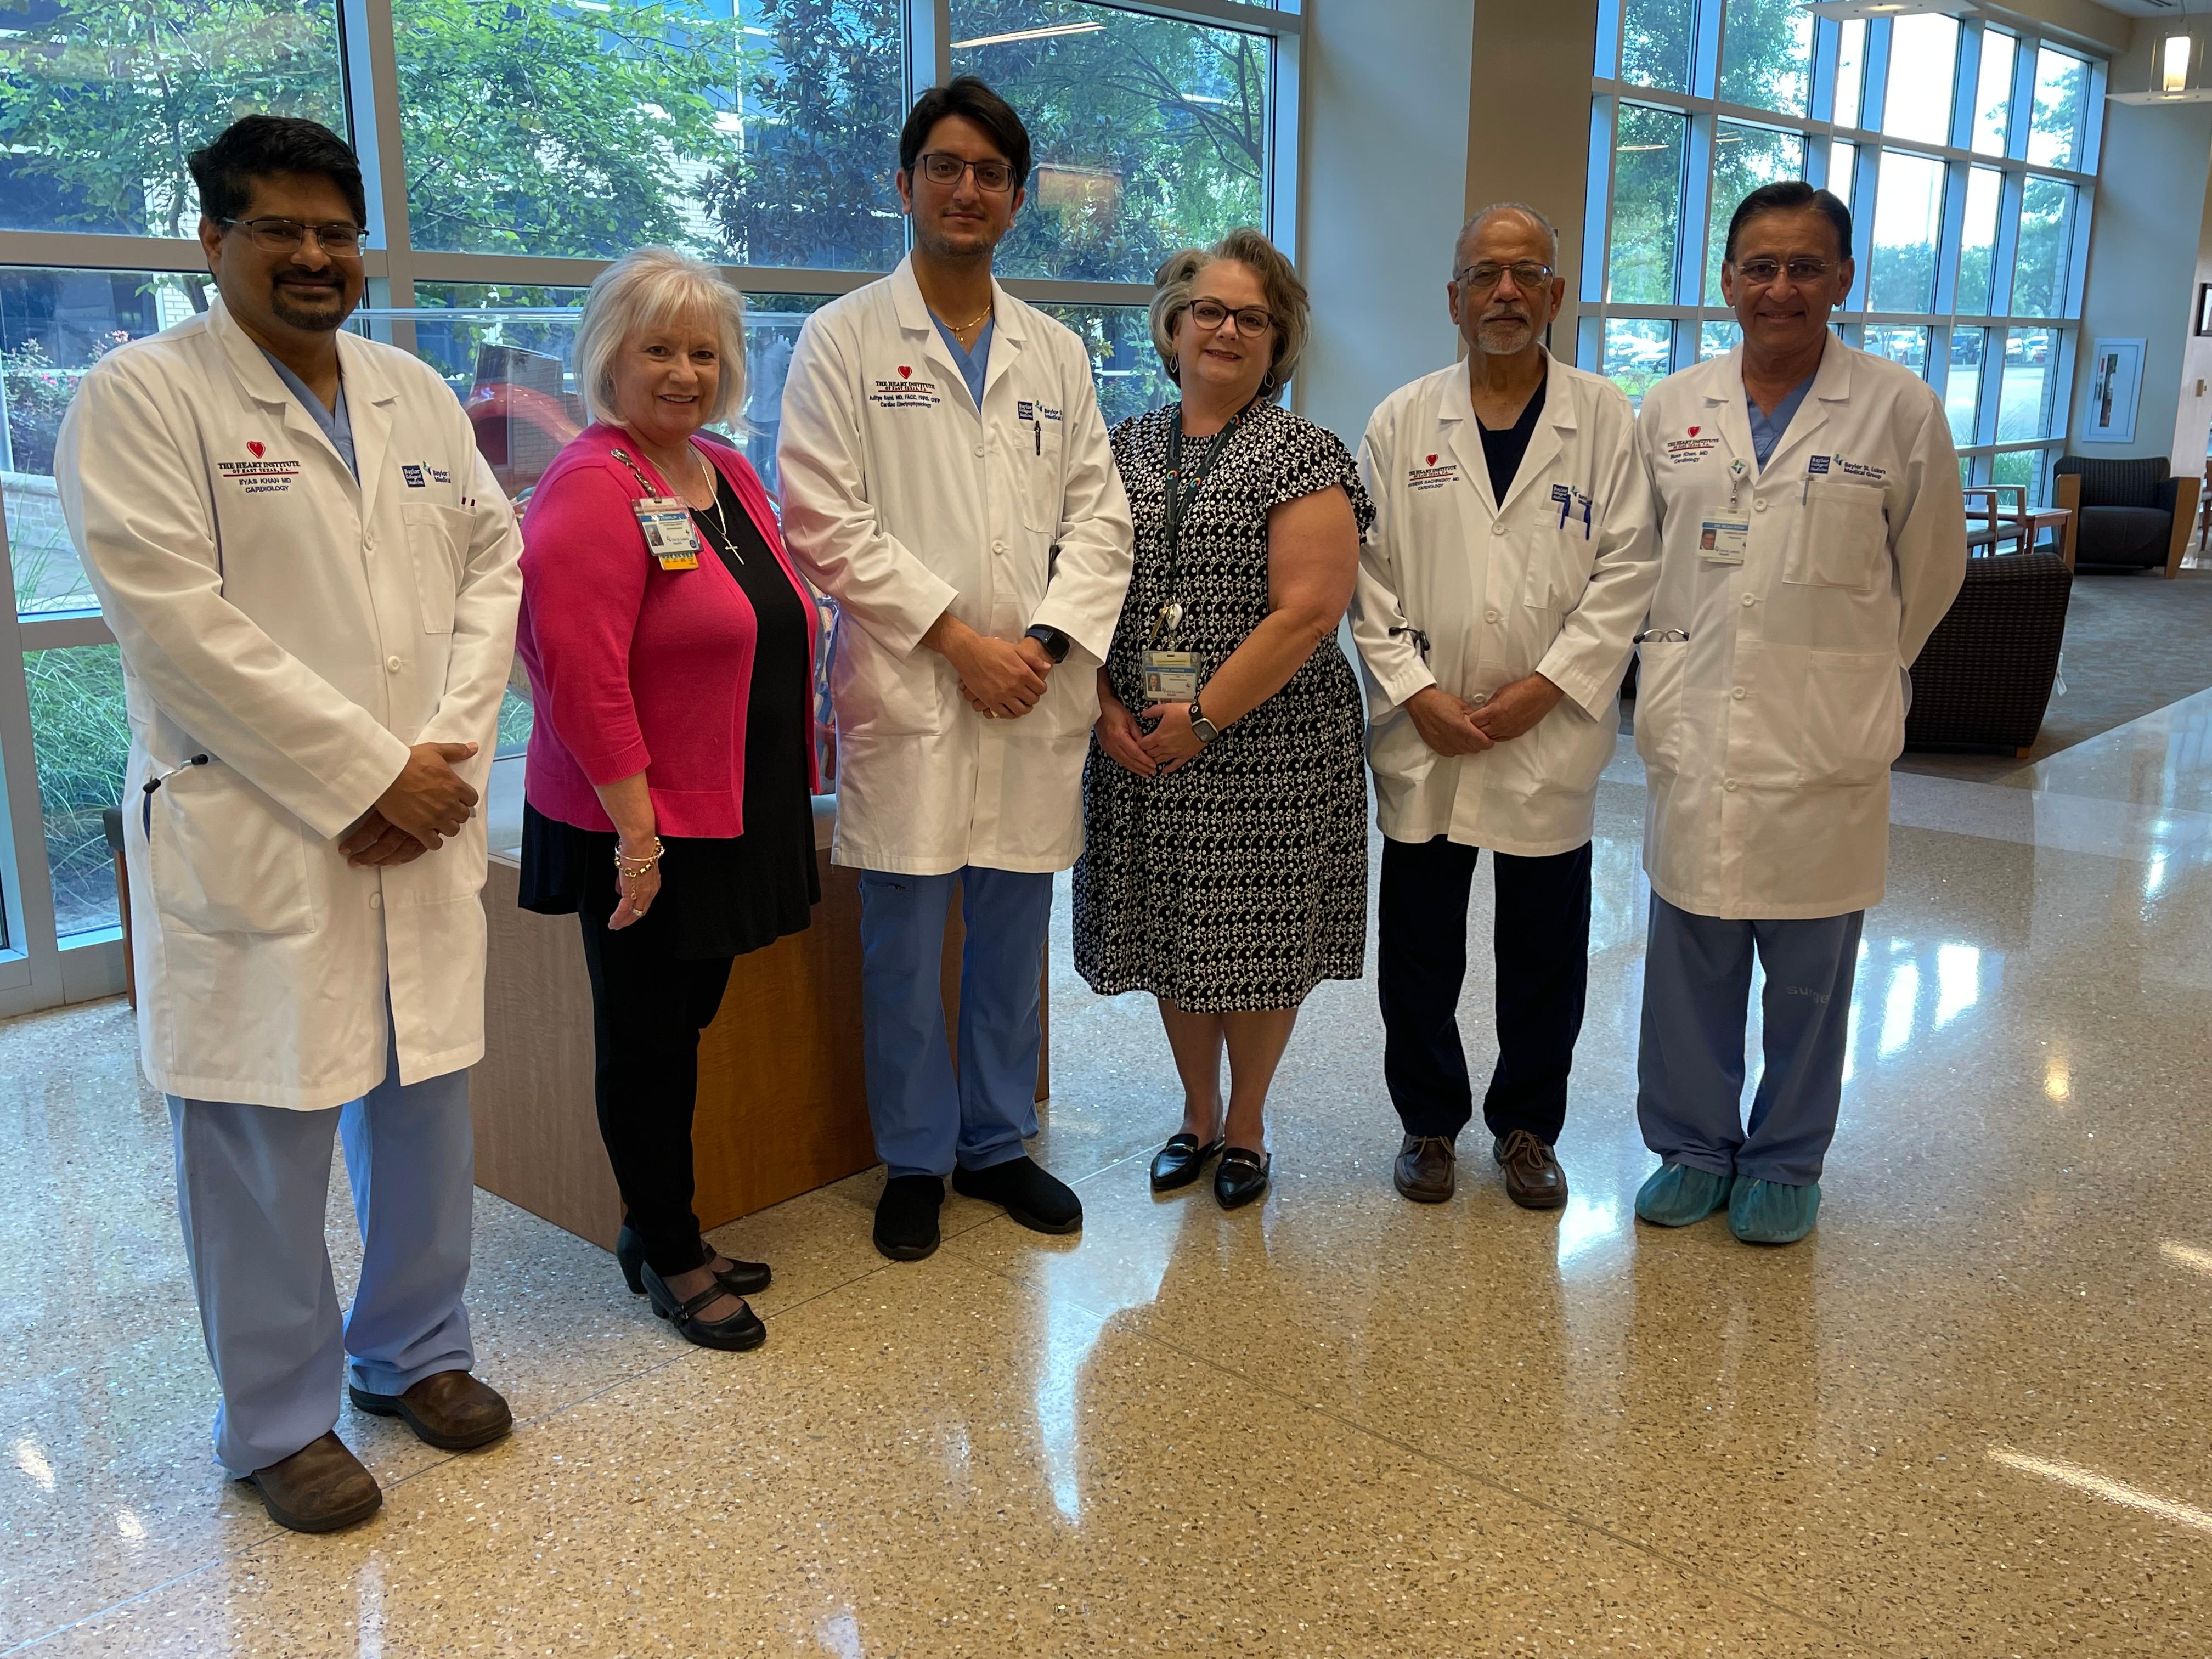 The Heart Institute of East Texas is proud to announce the first case in Lufkin for new generation WATCHMAN FLEX device for Atrial Fibrillation performed at St. Luke’s Health Memorial by Dr. Aditya Saini, Dr. Ilyas Khan, and Dr. Subramanya Venkata.